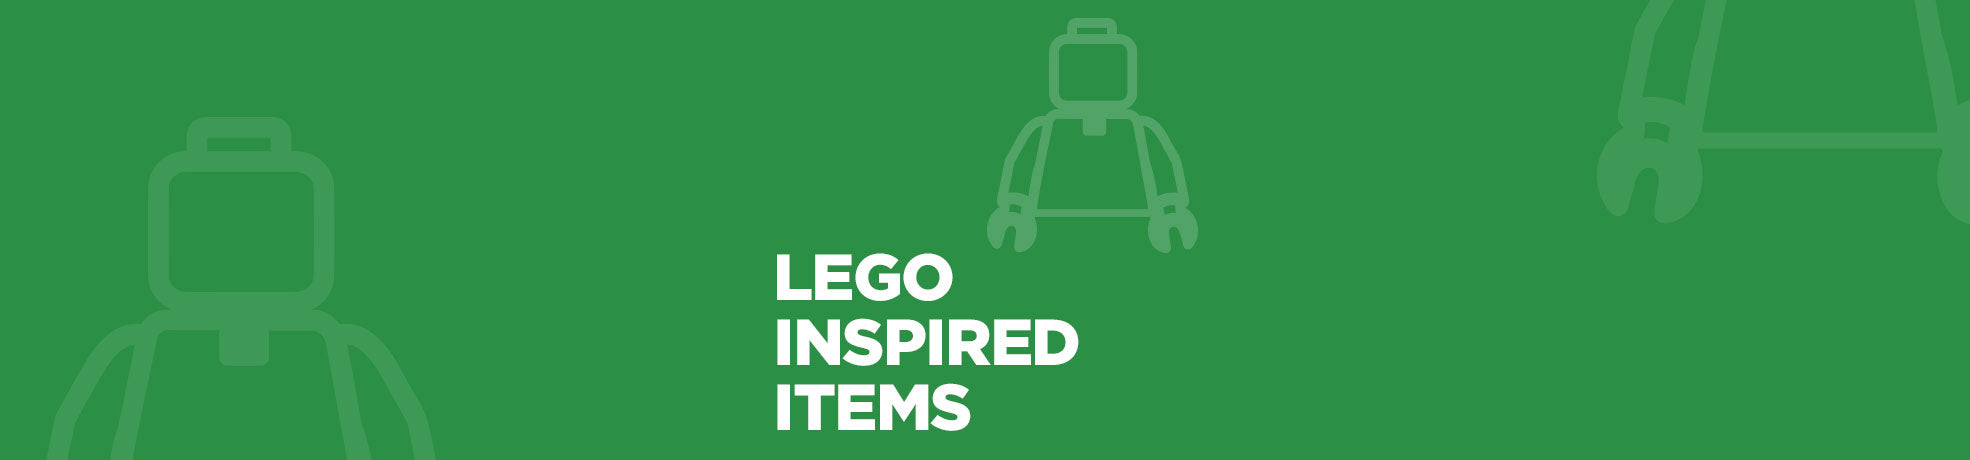 Lego Inspired Items